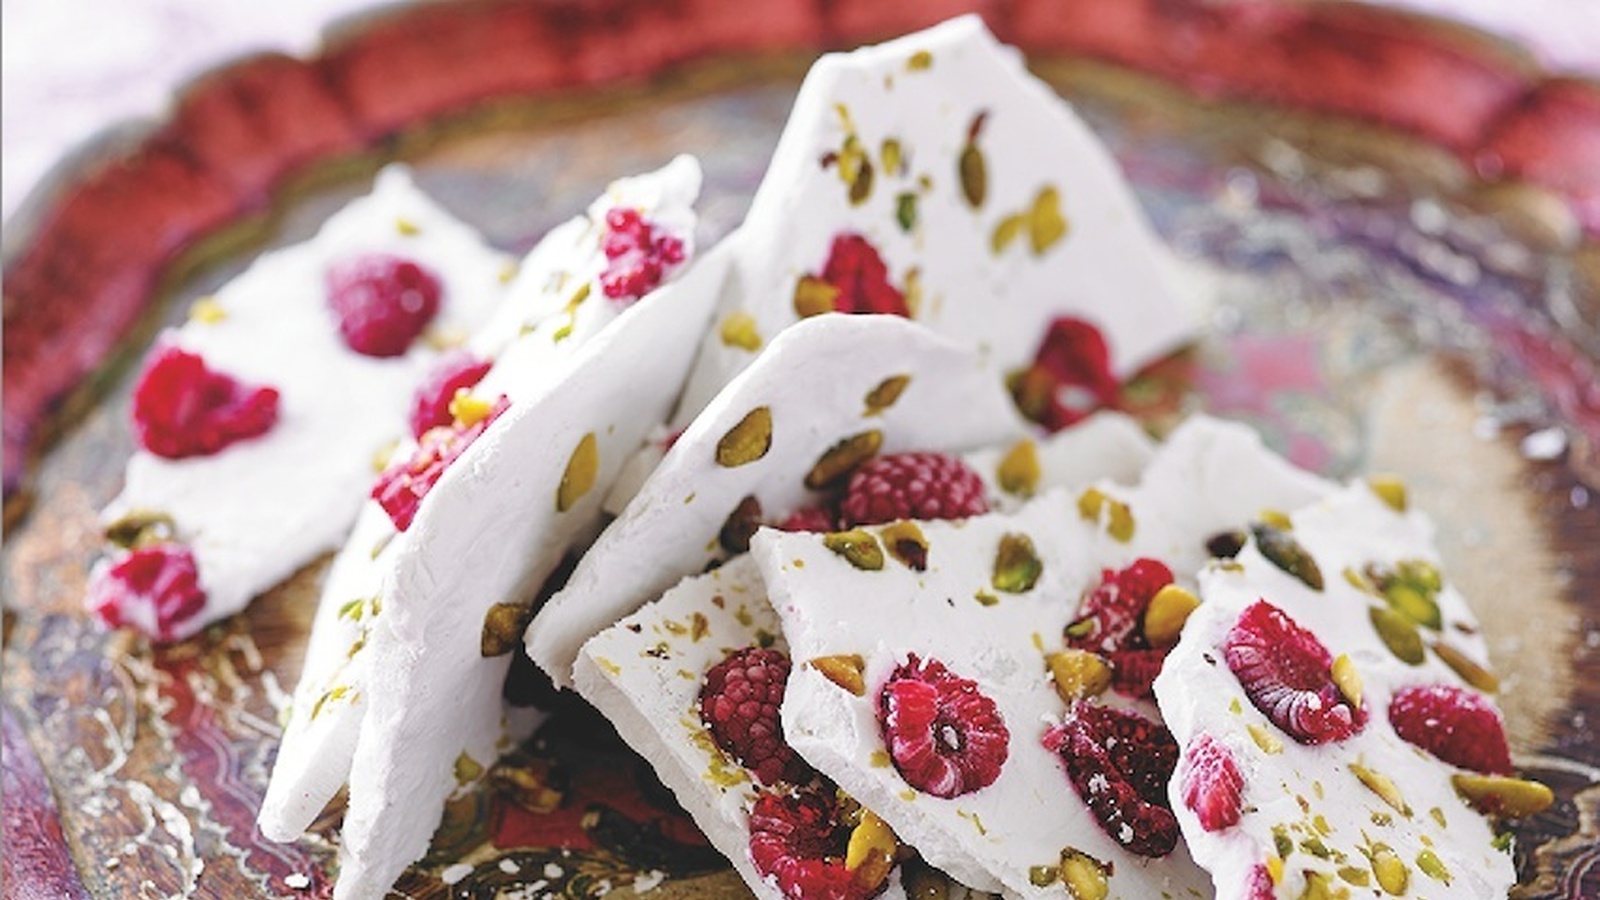 Coconut Bark With Rosewater, Pistachios and Raspberries